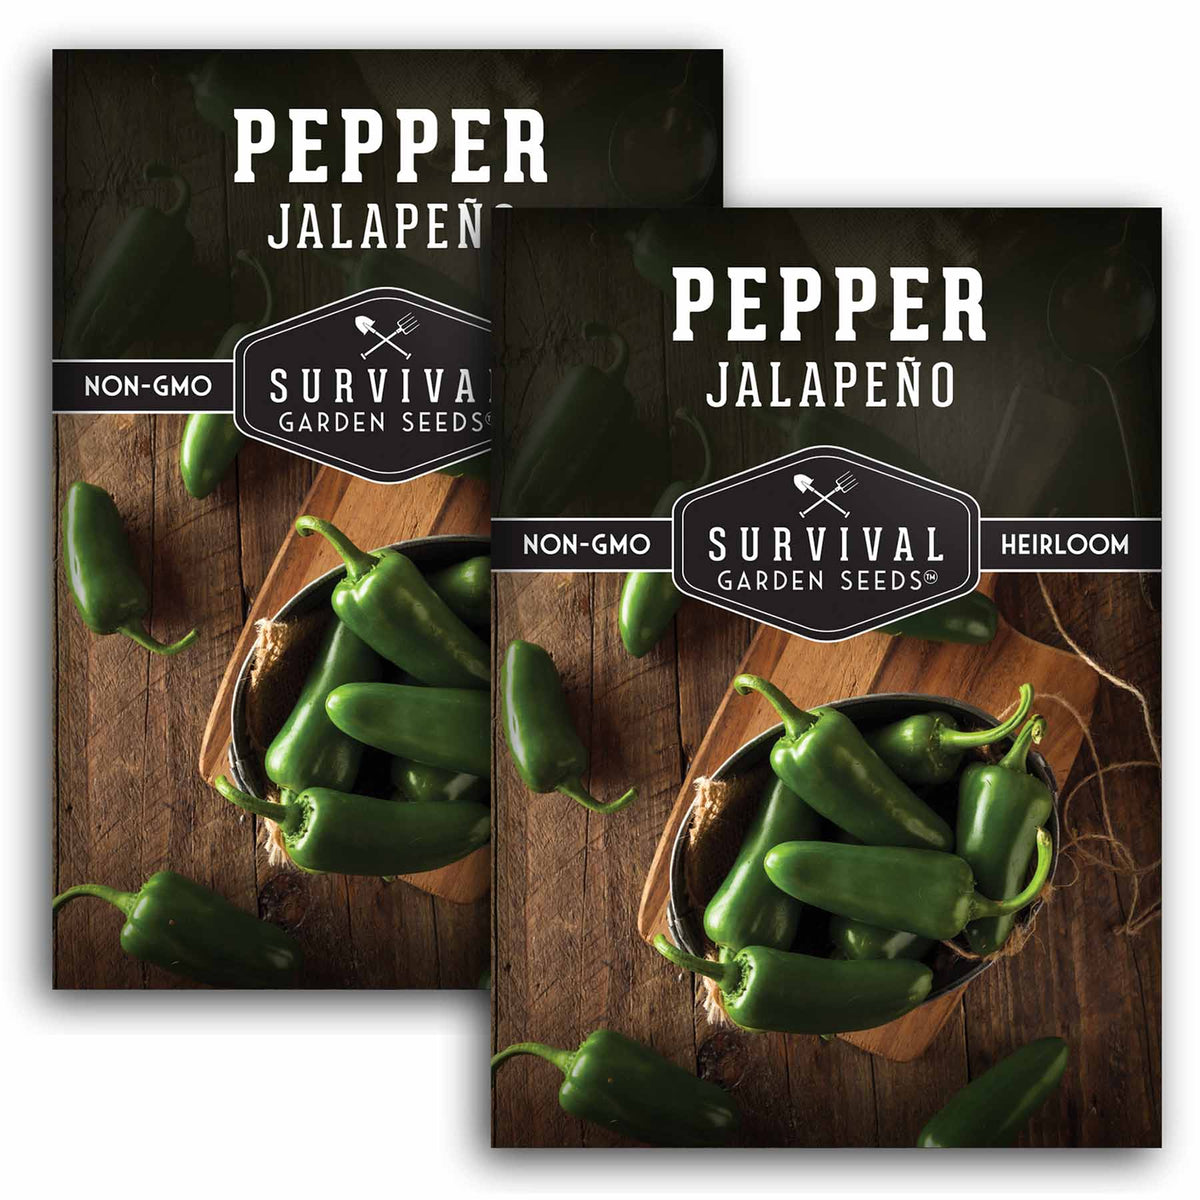 2 packets of Jalapeno Pepper seeds